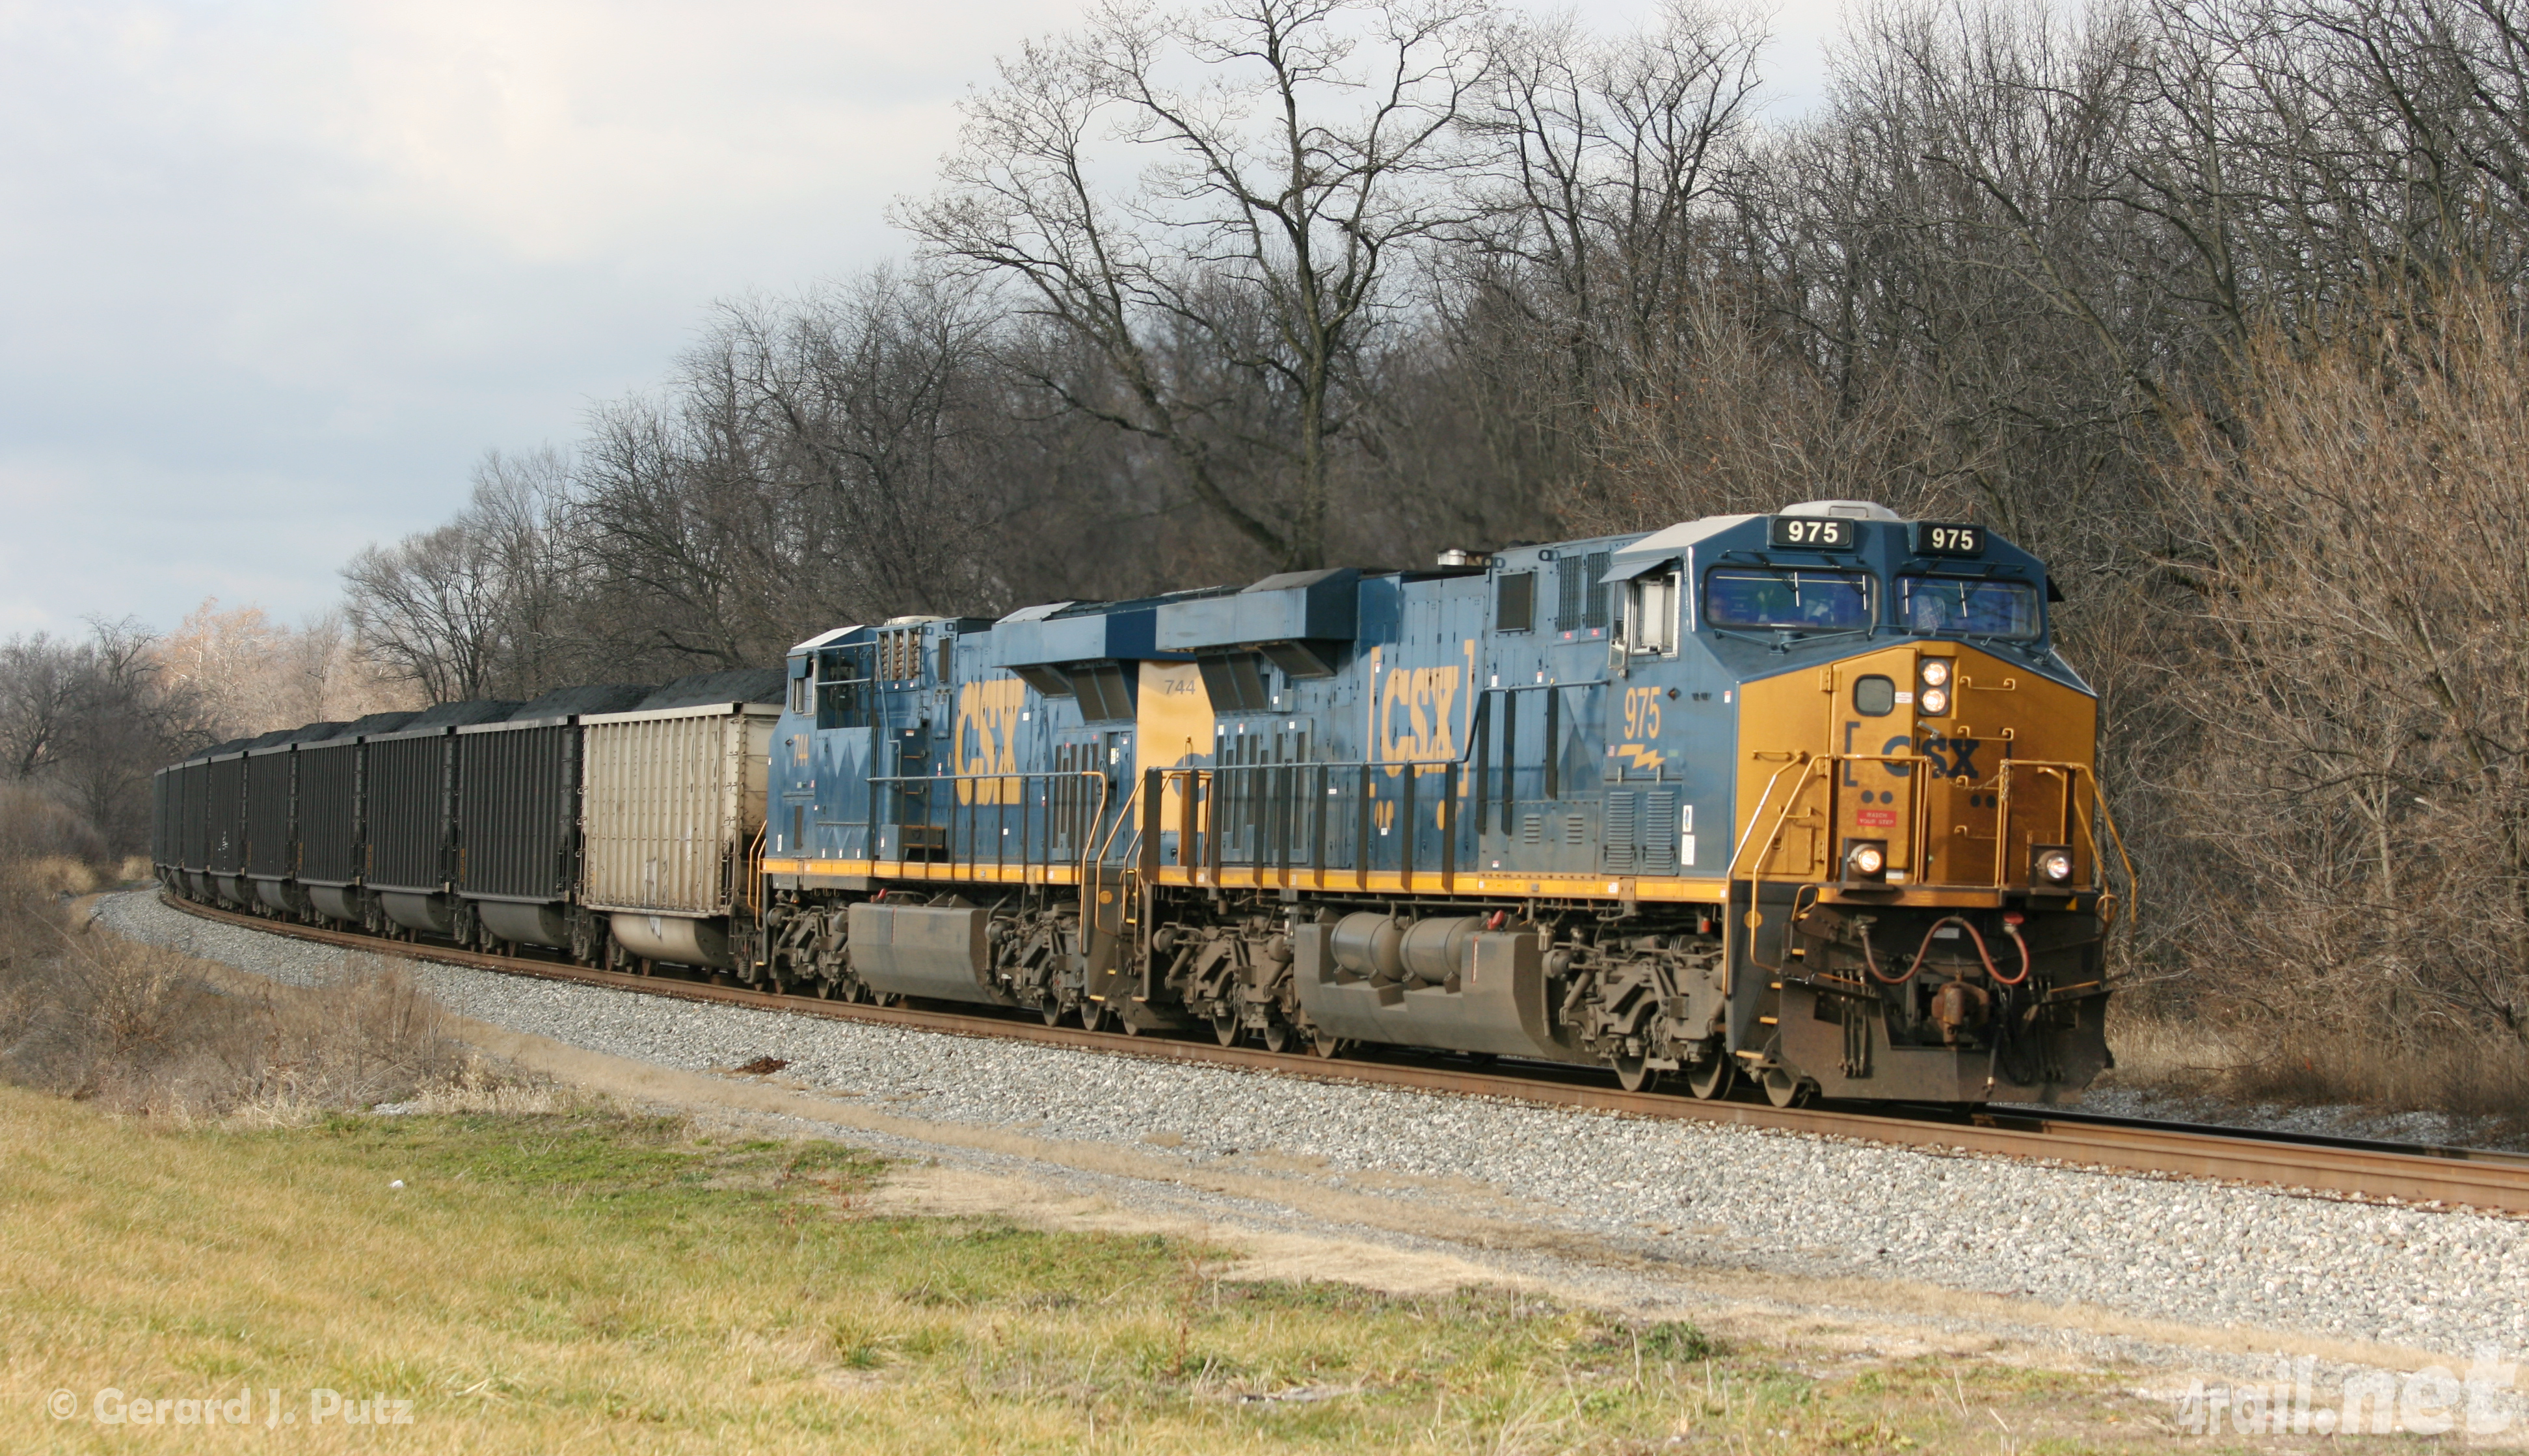 4rail Railroad Pictures Gallery Of Csx